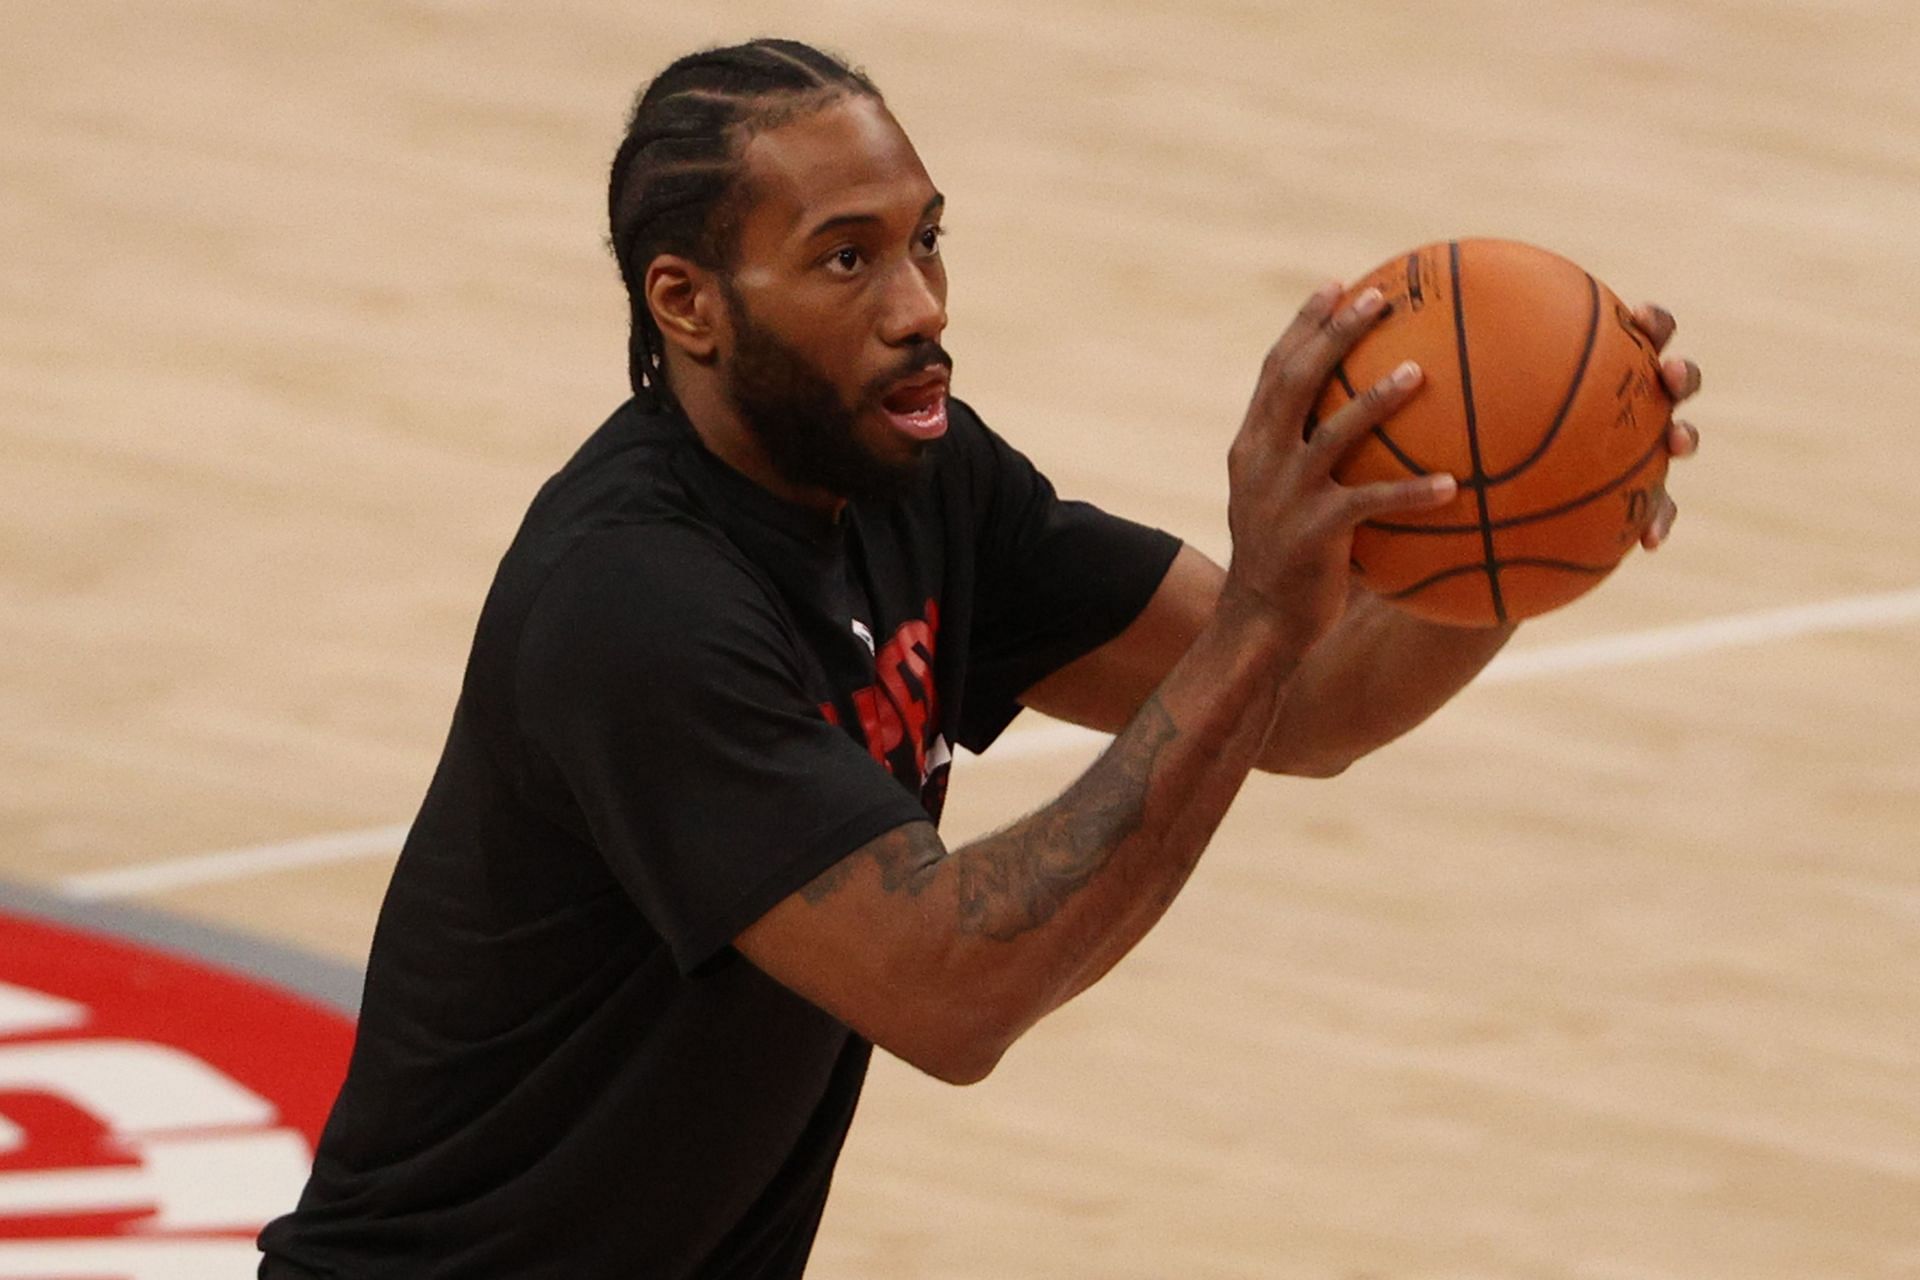 Kawhi Leonard is currently out due to a partially torn ACL in his right knee.